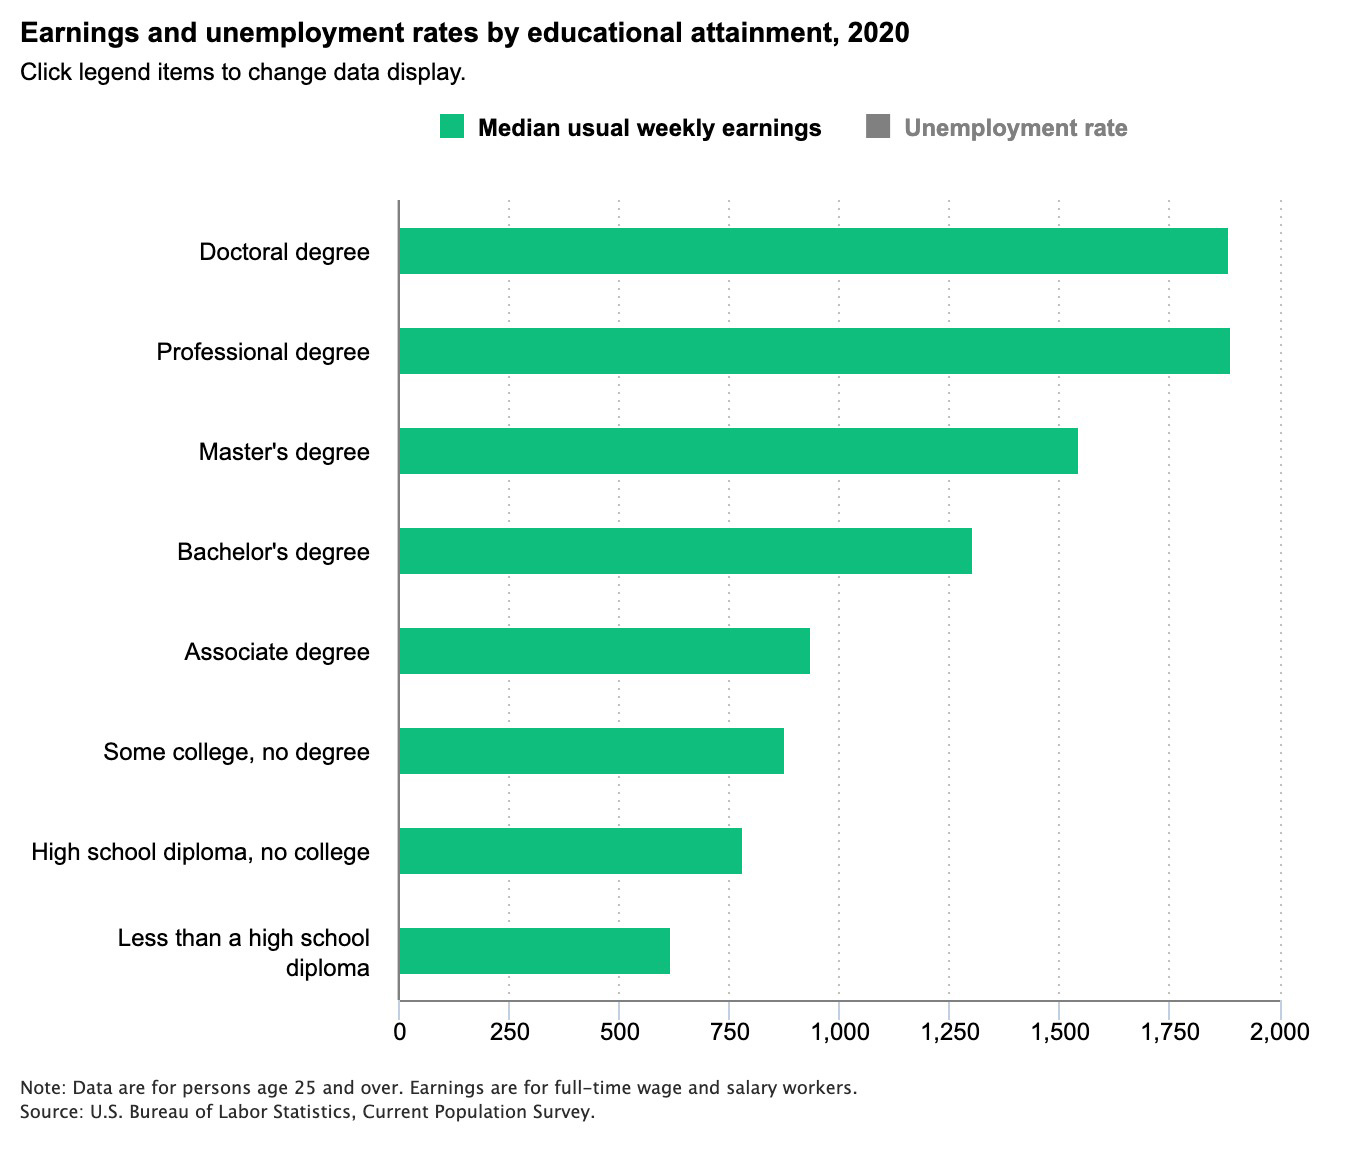 Earnings and unemployment rates by educational attainment, 2020 chart